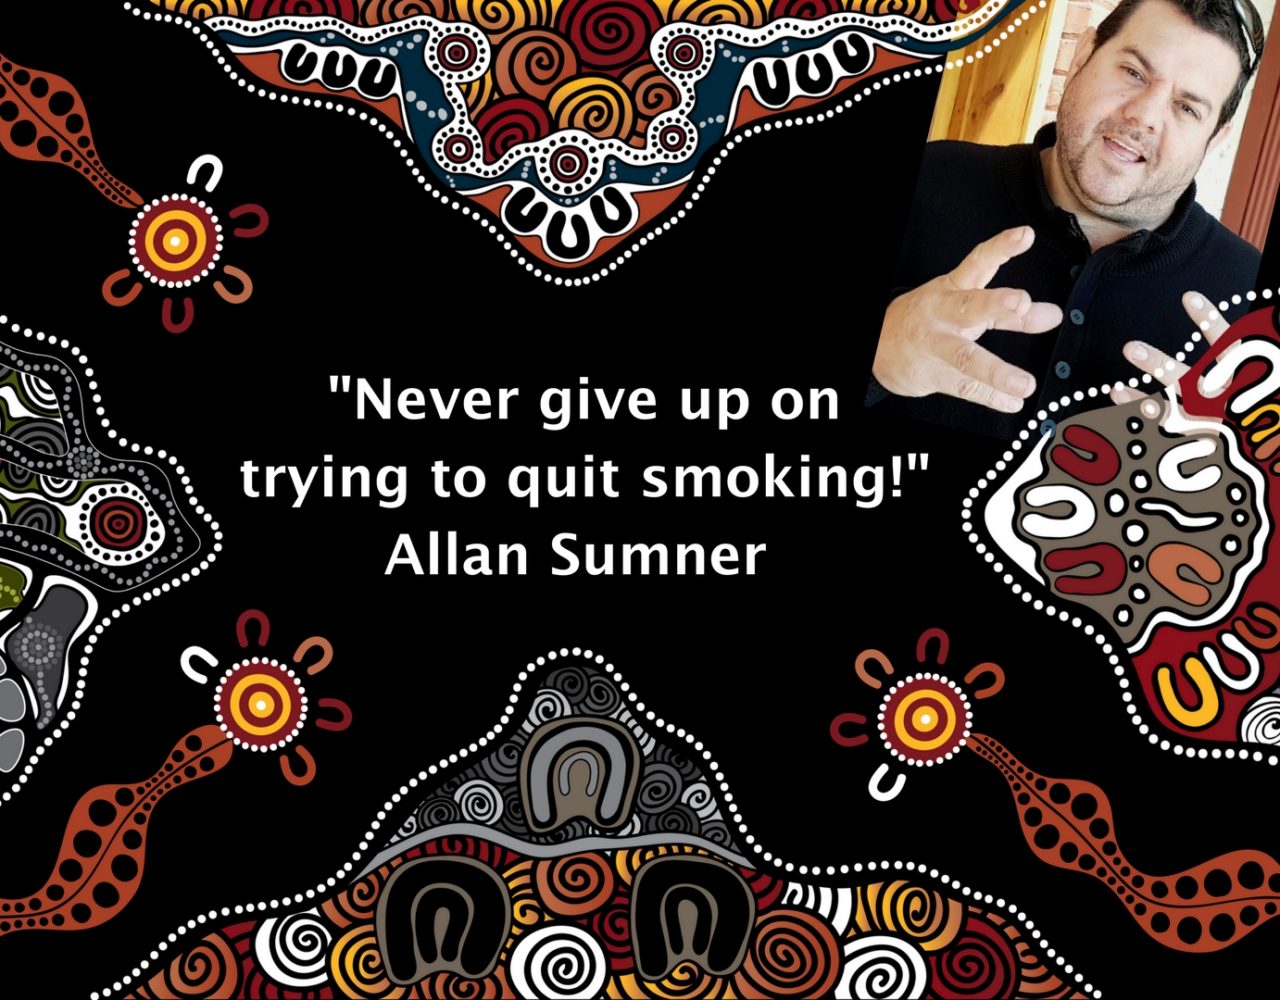 New artwork illustrates the story Nunkuwarrin Yunti and the community share in tackling tobacco